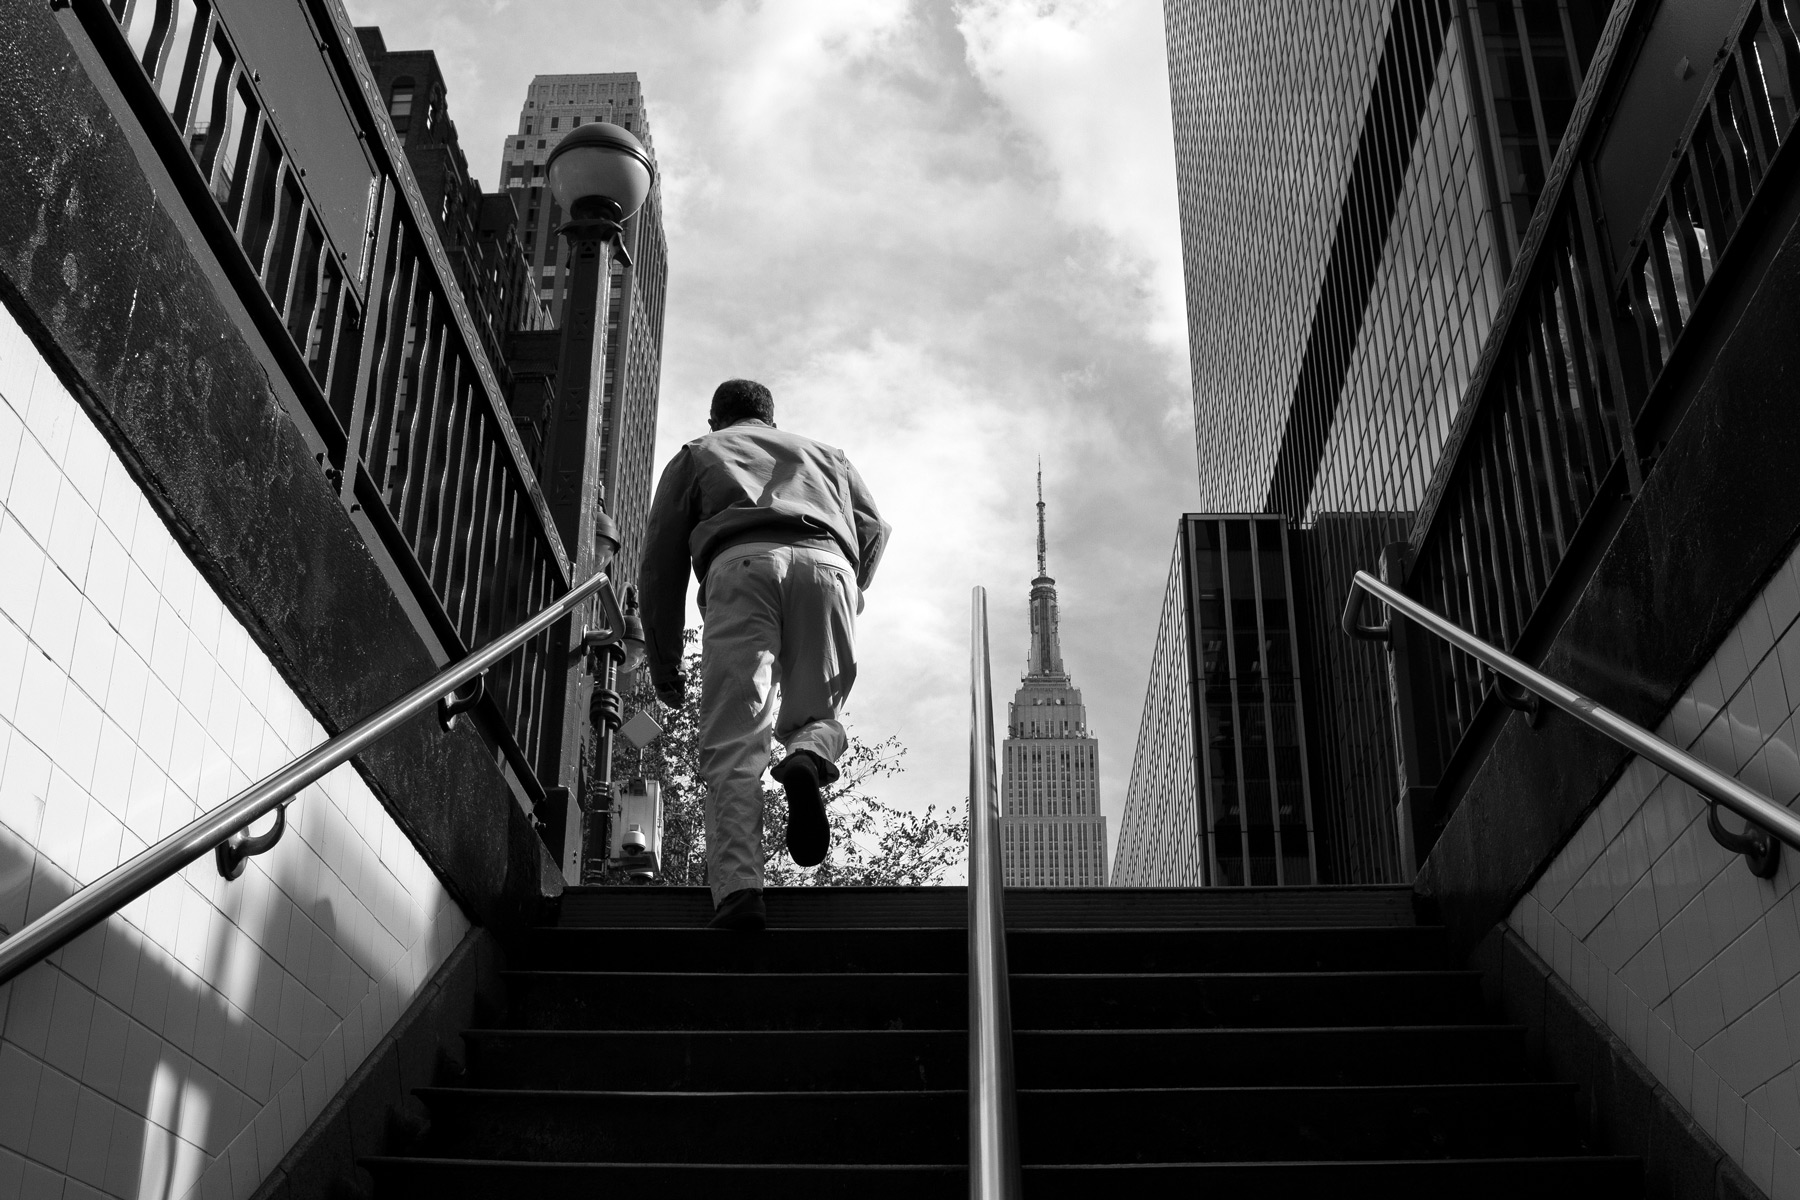 A man walking up stairs from the subway with the Empire State building in the background